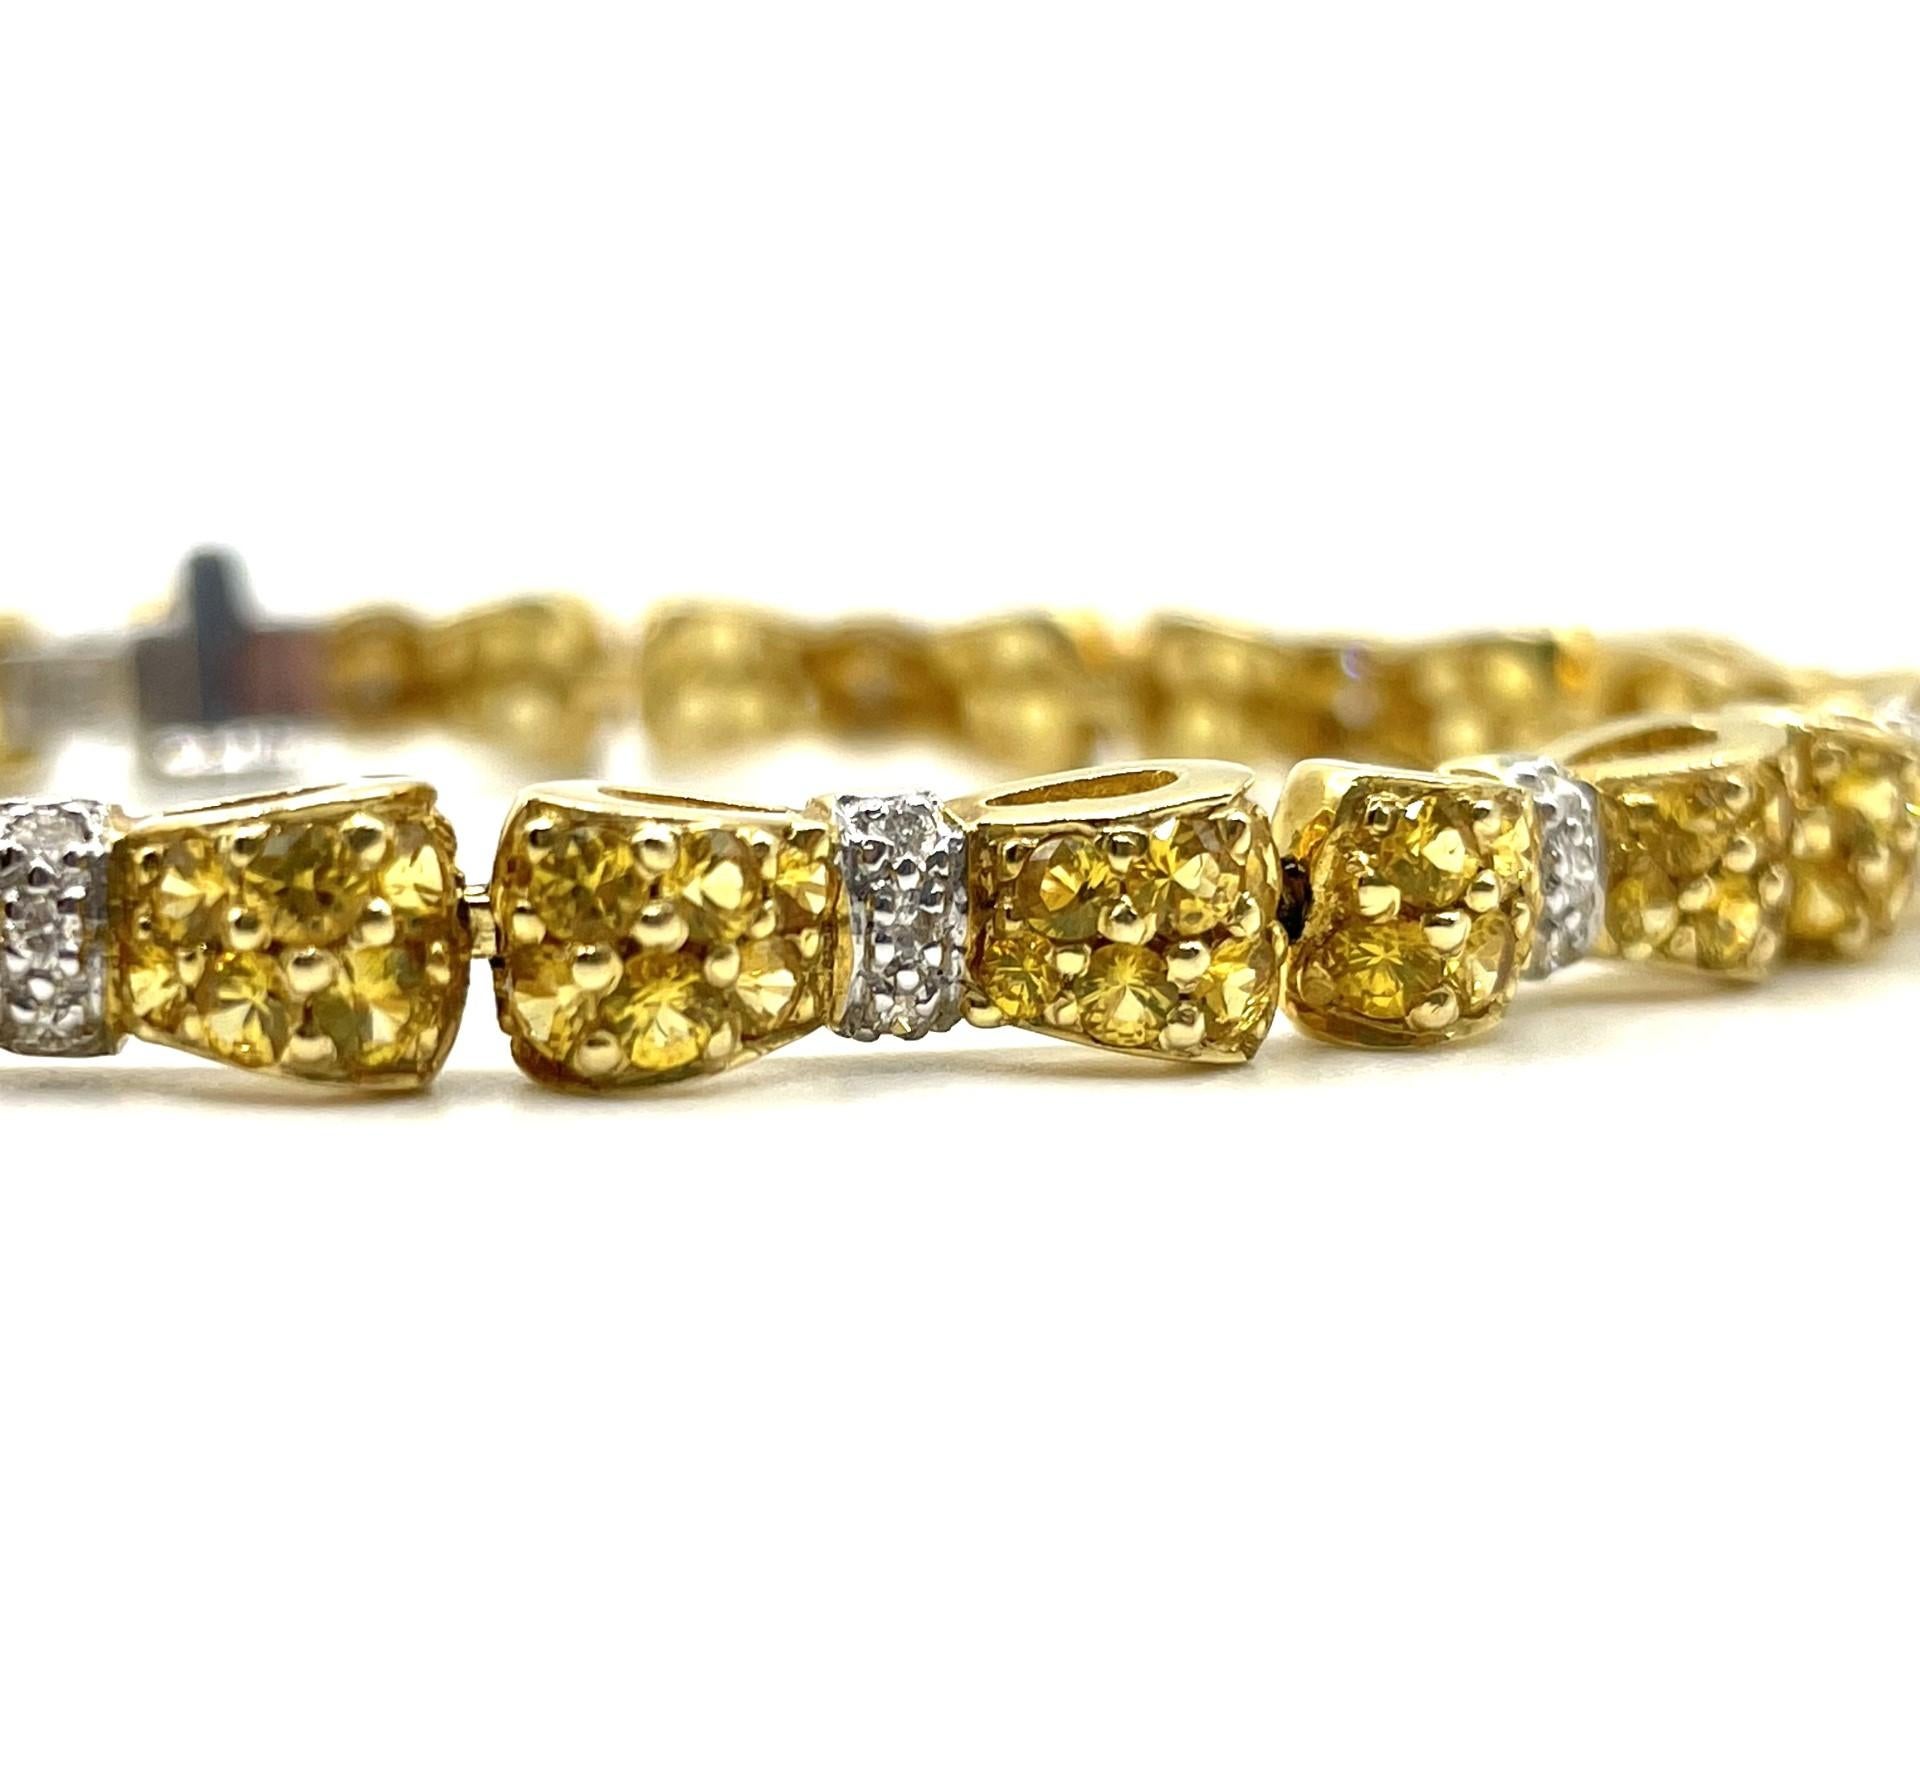 An Beautiful Bow Tie Bracelet set with natural yellow sapphires and natural white diamonds in 18kt yellow gold.

144 natural yellow sapphires weighing 6.00ct total weight

36 natural white diamonds weighing 0.30ct total weight

18kt yellow gold, 18